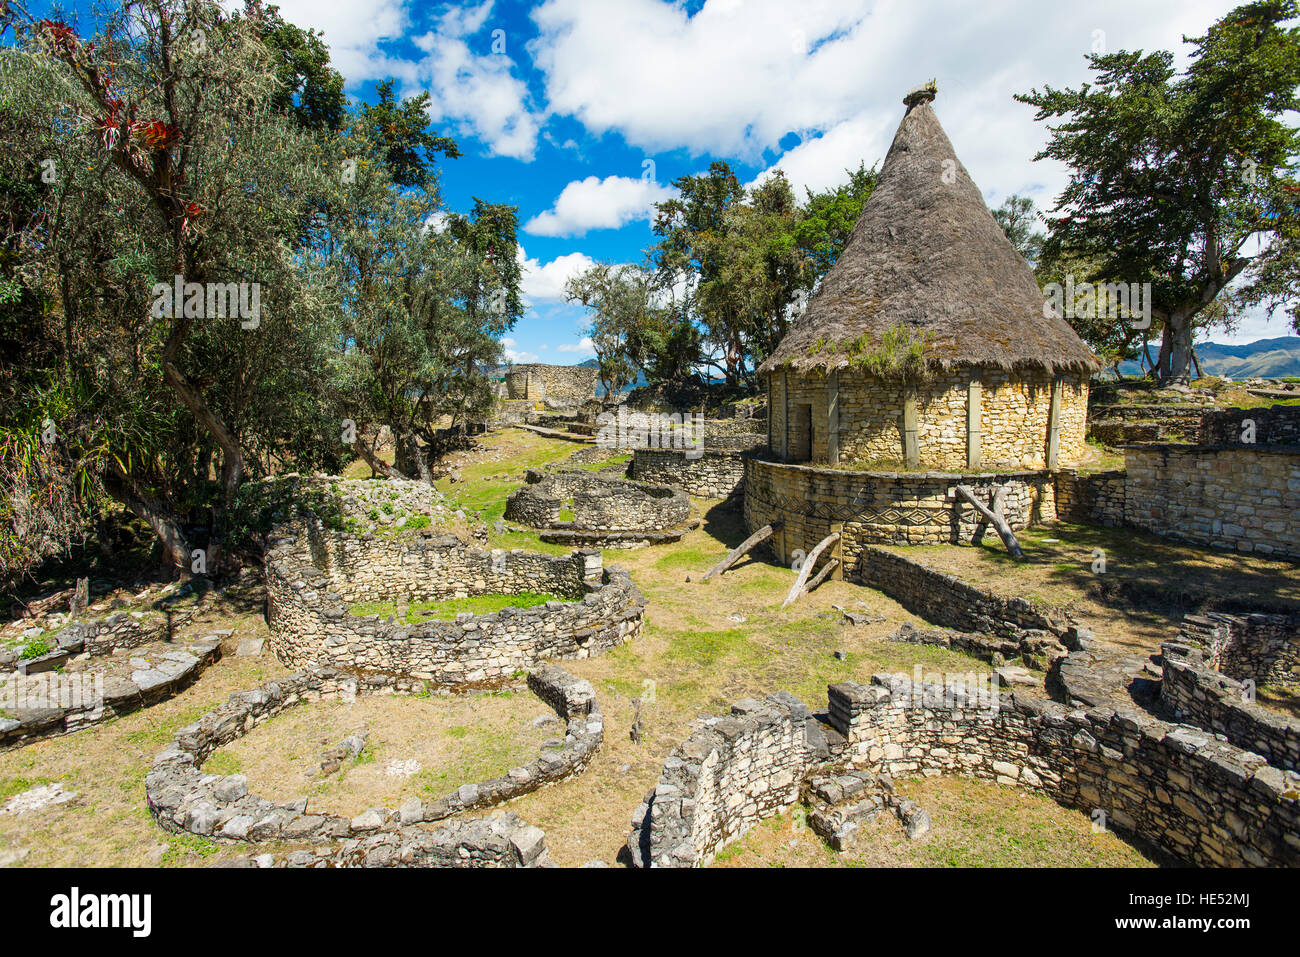 Ruins of round houses, Kuelap fortress, Chachapoyas, Luya Province, Andes, Peru Stock Photo